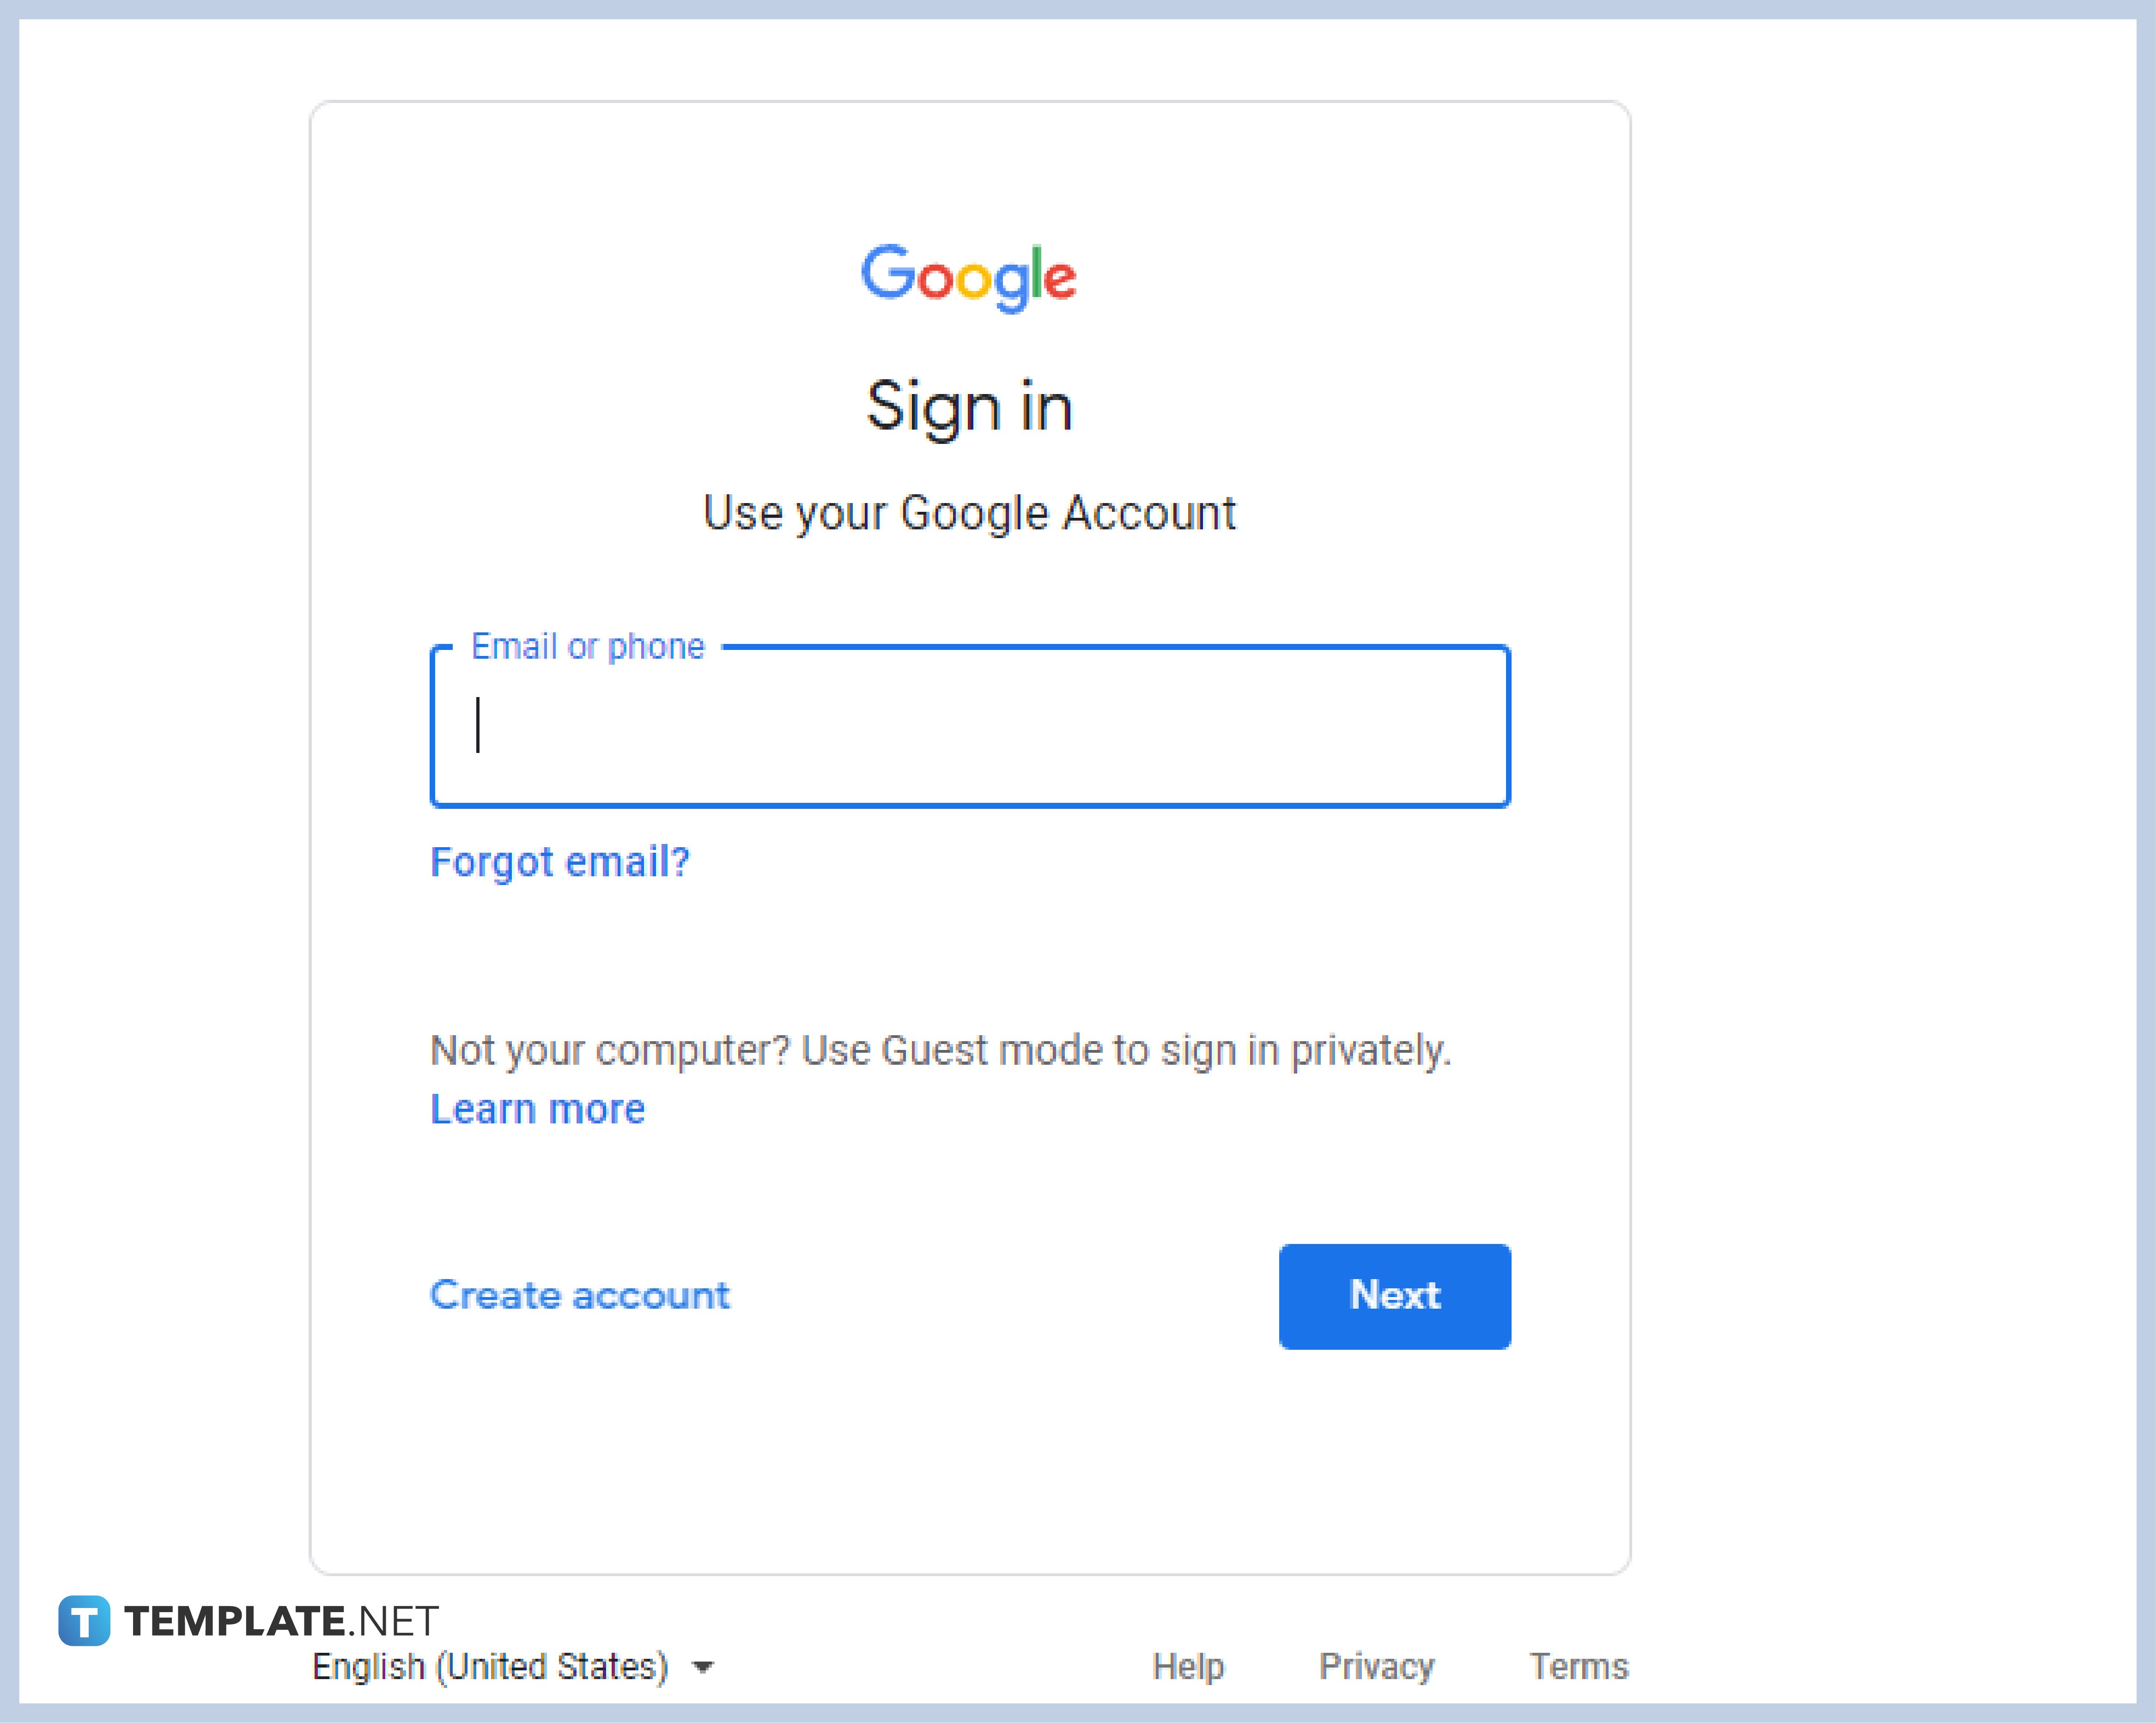 step-1-open-google-mail-on-your-computer-android-or-ios-devices-01